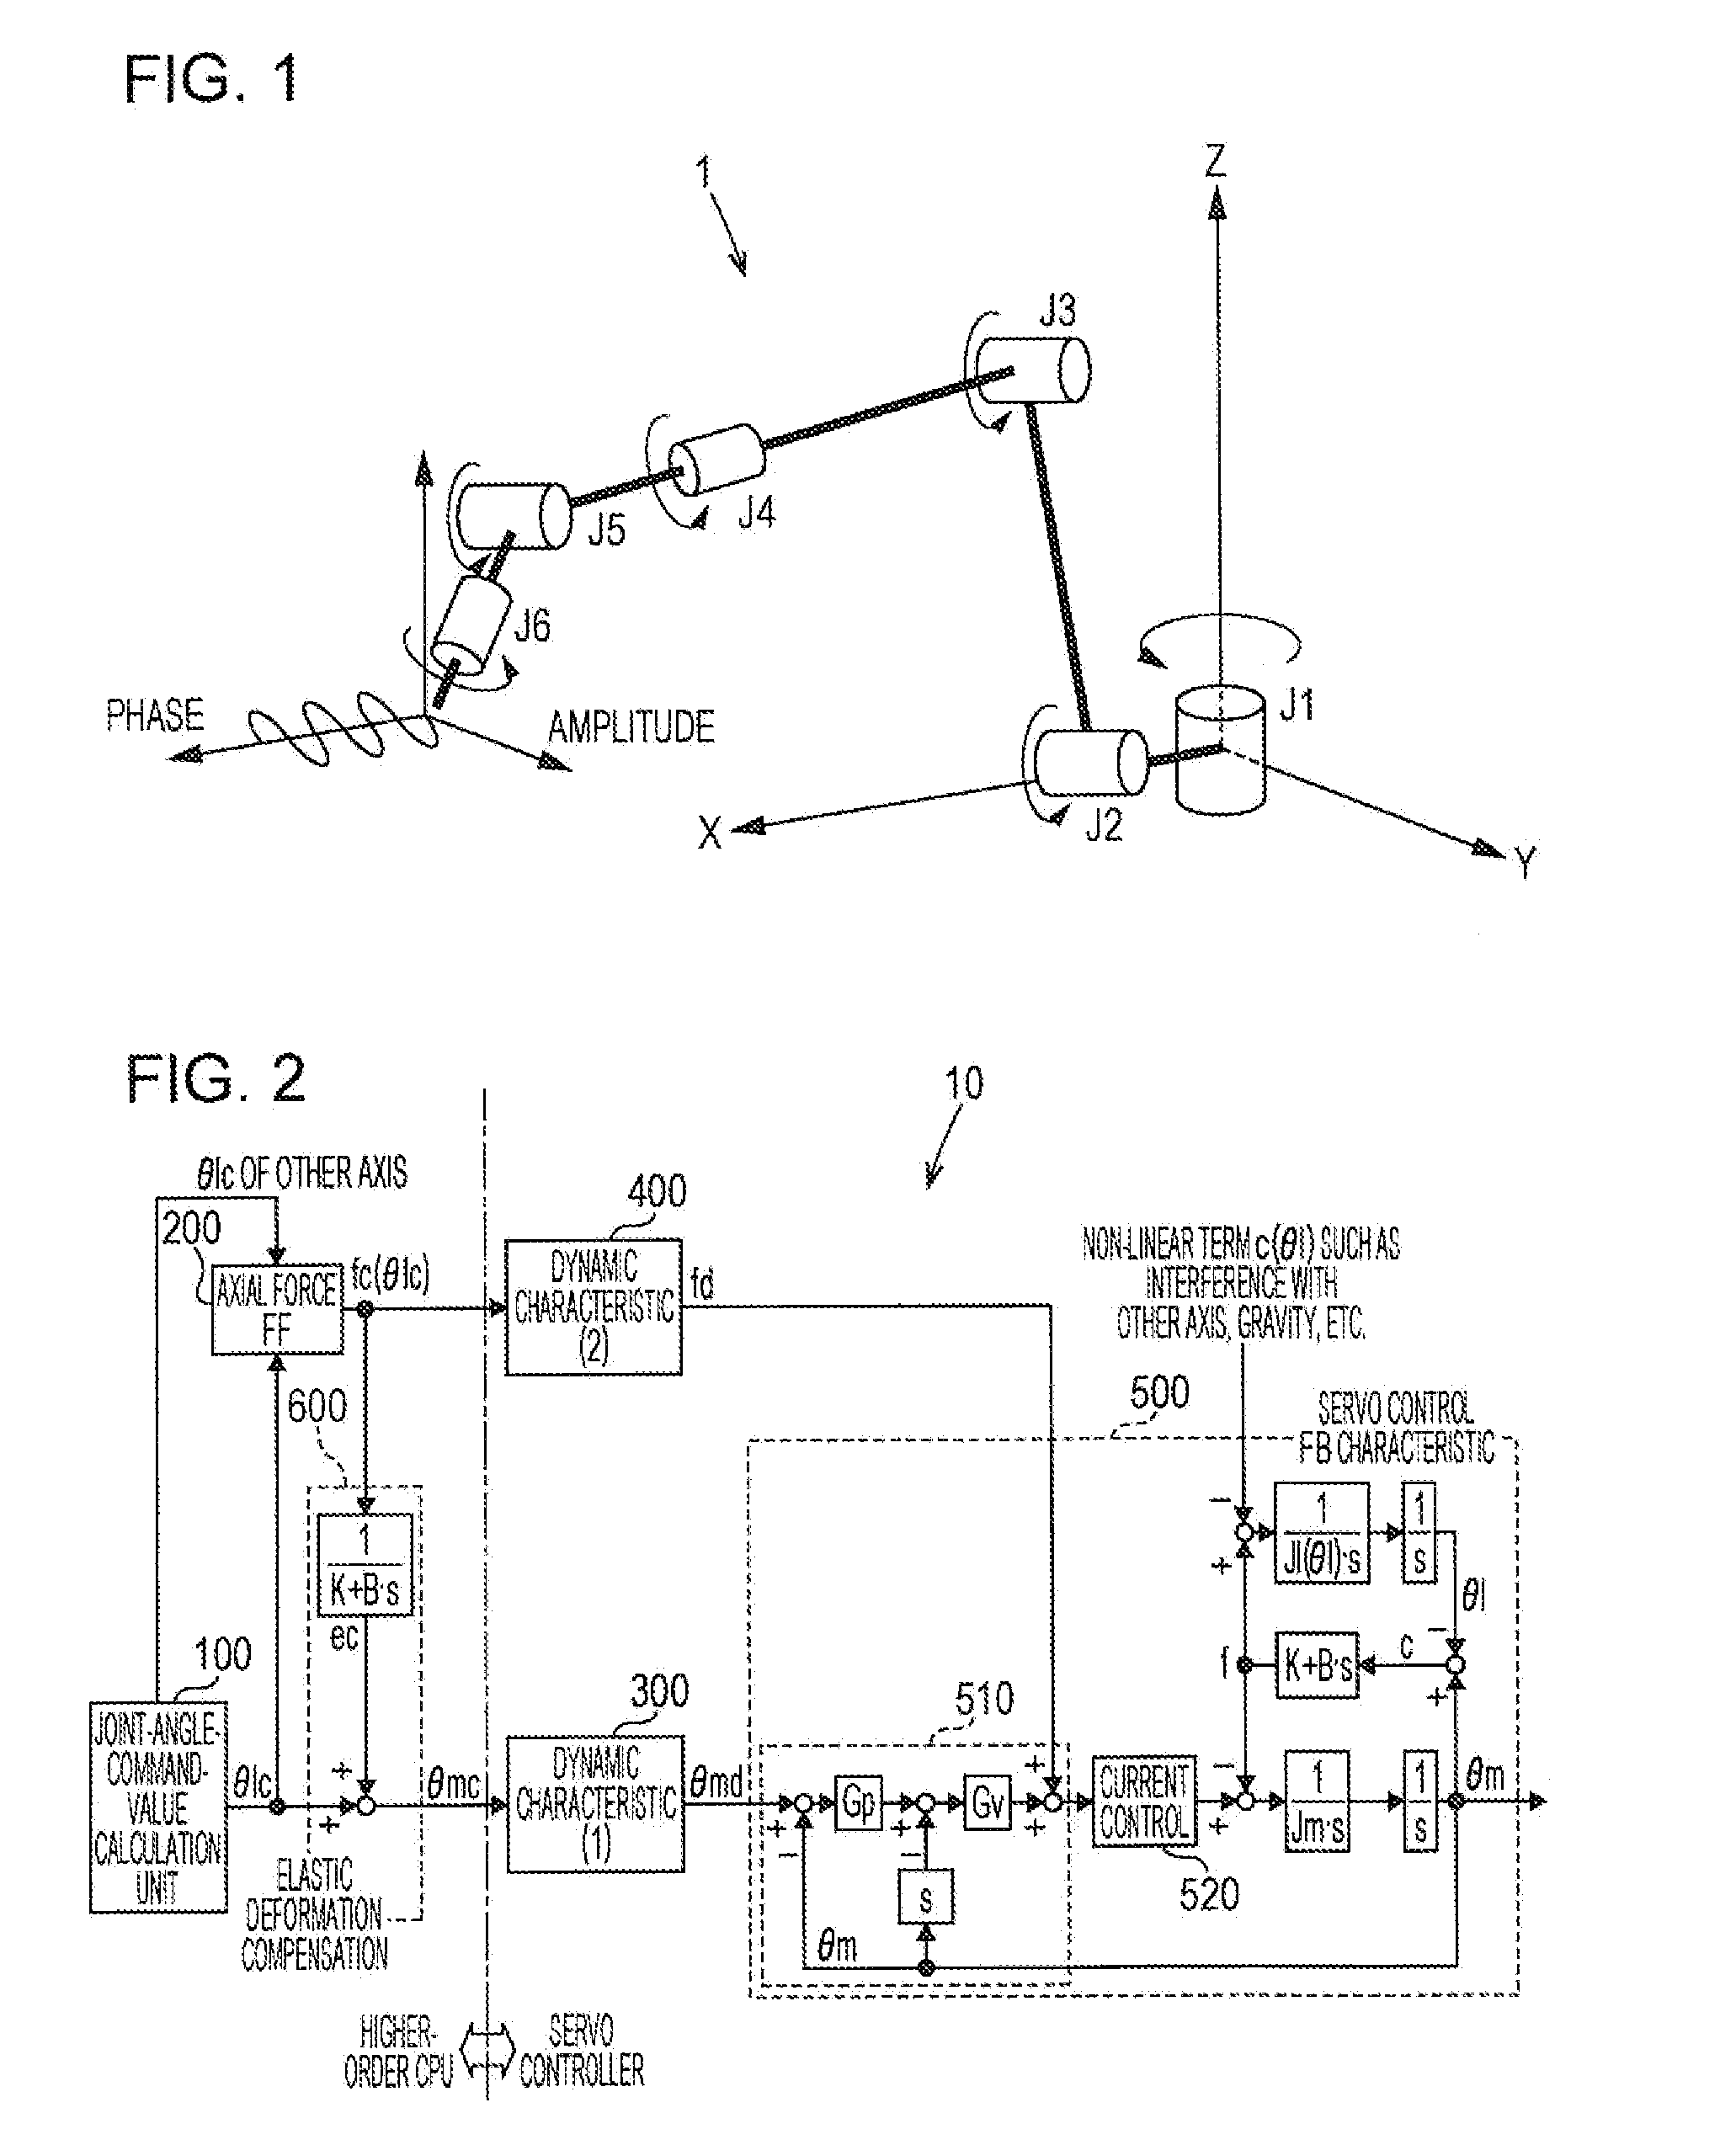 Elastic-deformation-compensation control device and control method for articulated robot